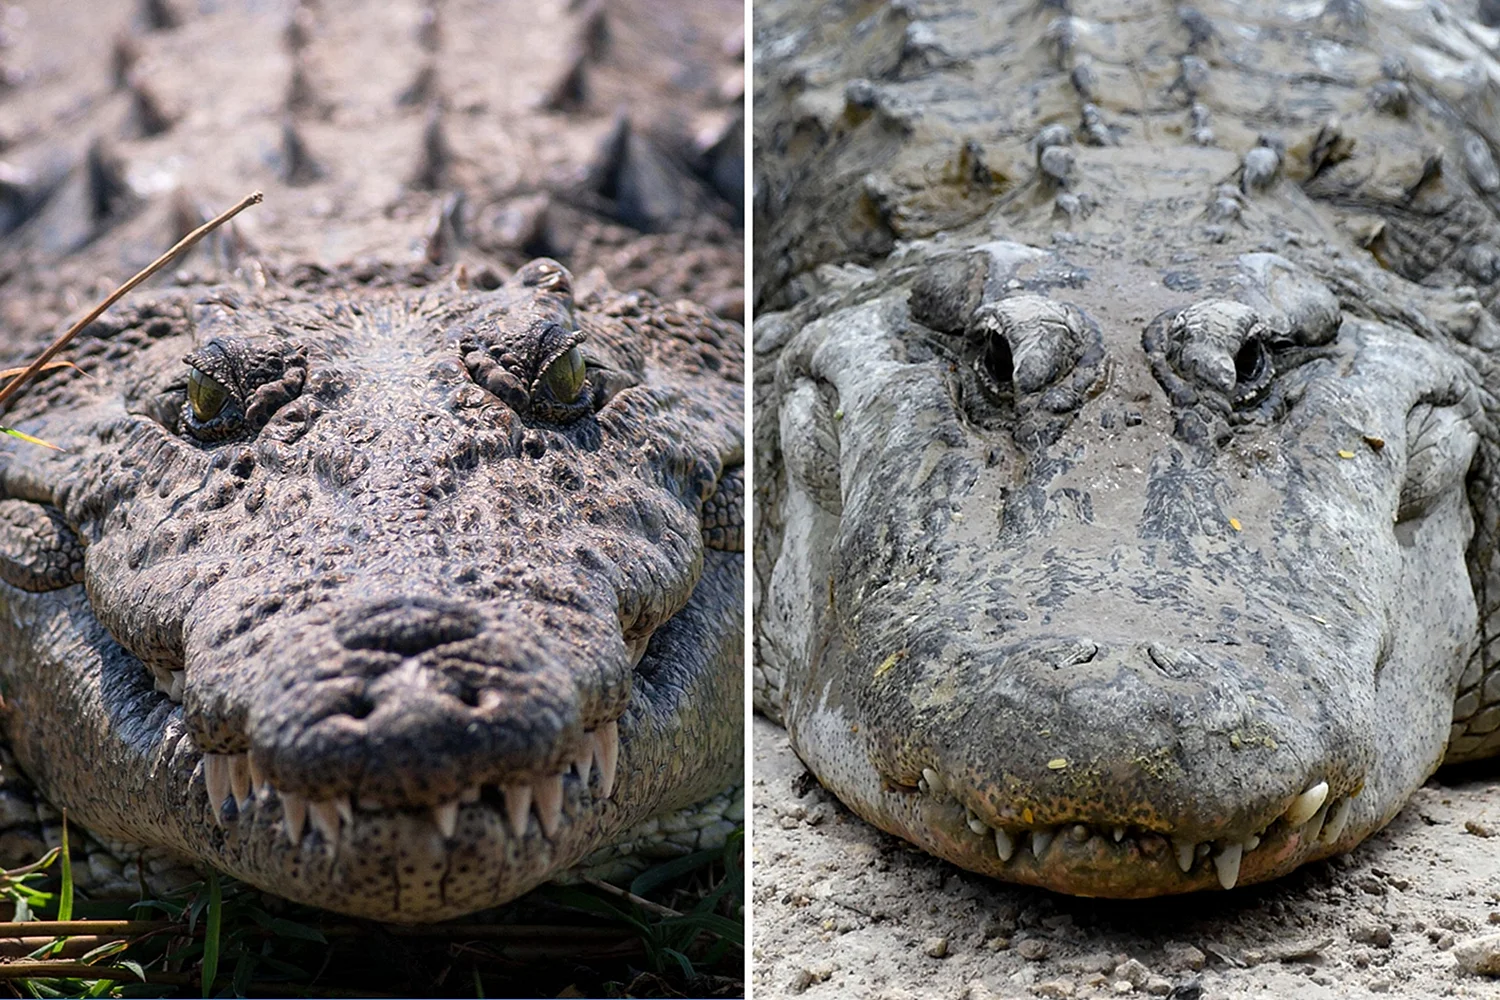 Alligator and Crocodile difference